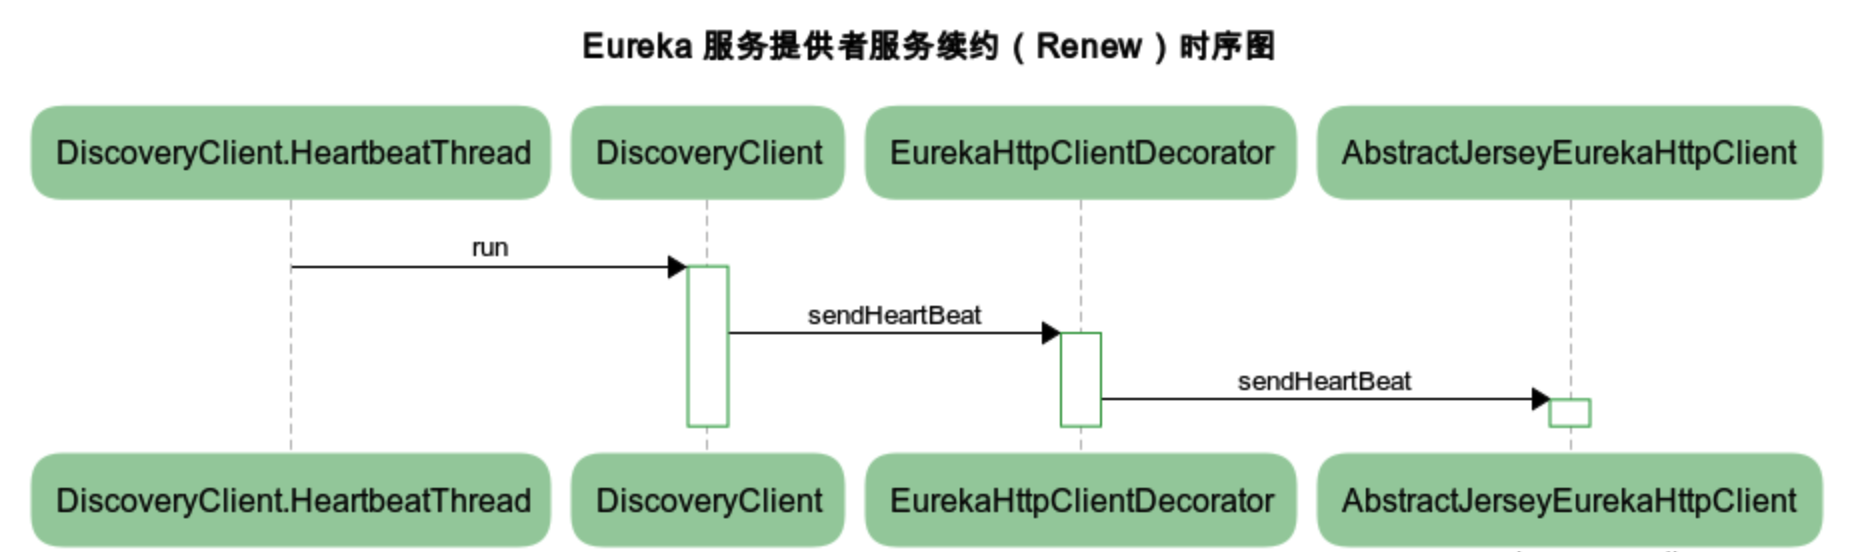 eureka-service-provider-renew-sequence-chart.png